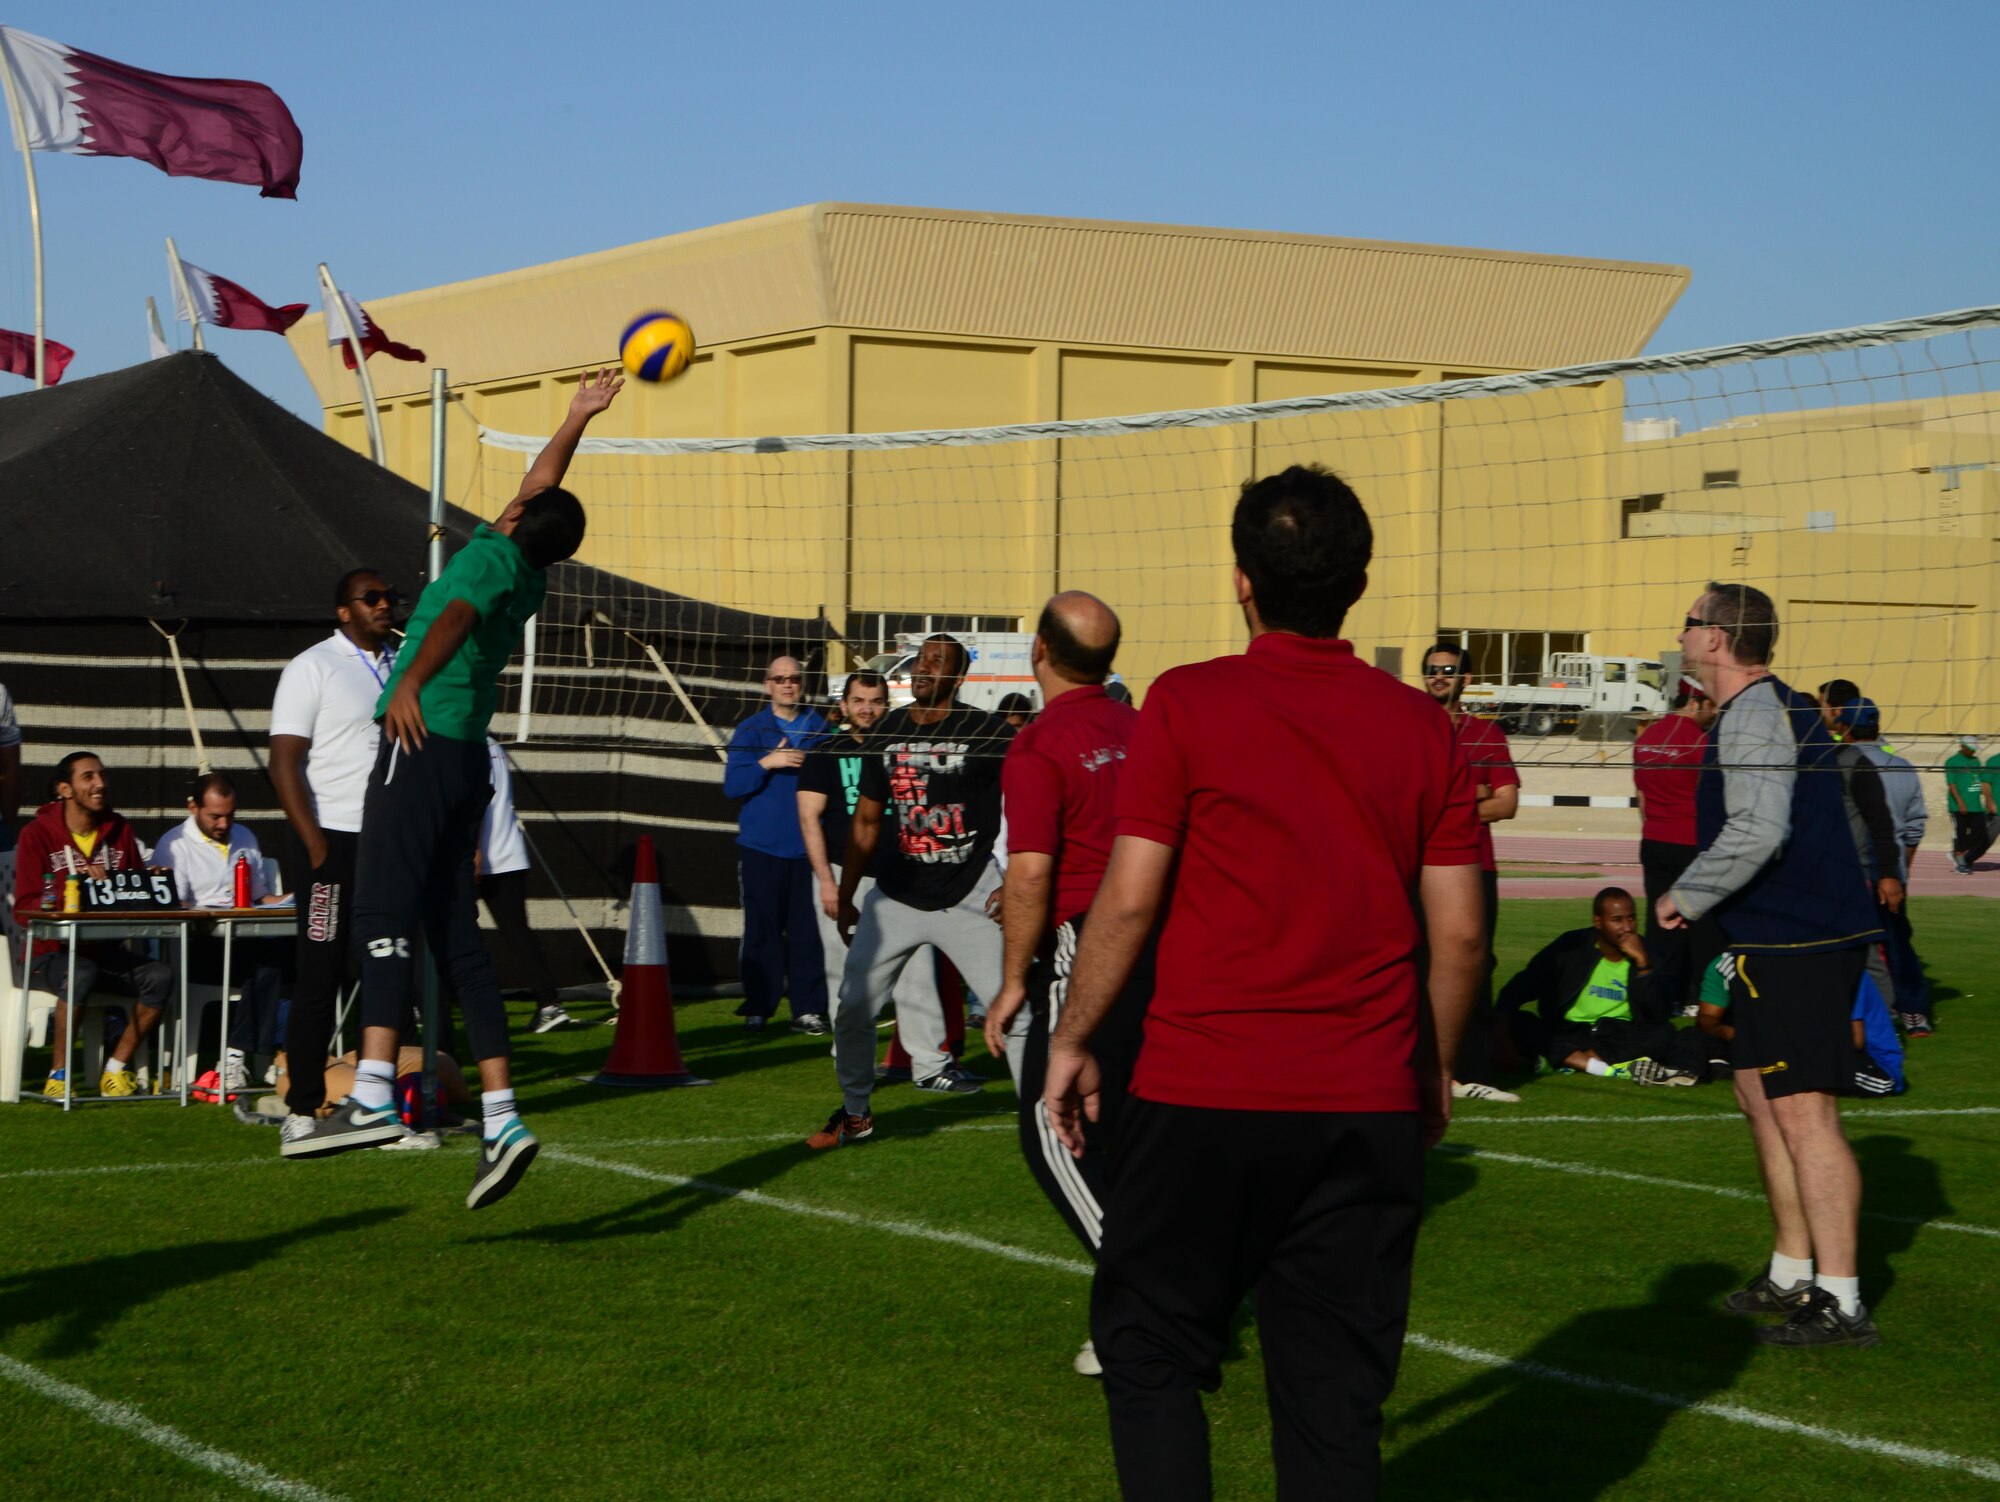 U.S. servicemembers and Qatar Emiri Air Force members play a game of volleyball during Qatar National Sports Day, Feb. 10, 2015, at Al Udeid Air Base, Qatar. The Qatar National Sports Day is an initiative adopted in 2011 by the current Emir, Sheikh Tamim bin Hamad Al Thani, to further embed sporting values into the nation's culture and inspire people to be healthy and engage in physical activities. (U.S. Air Force photo by Senior Airman Kia Atkins)